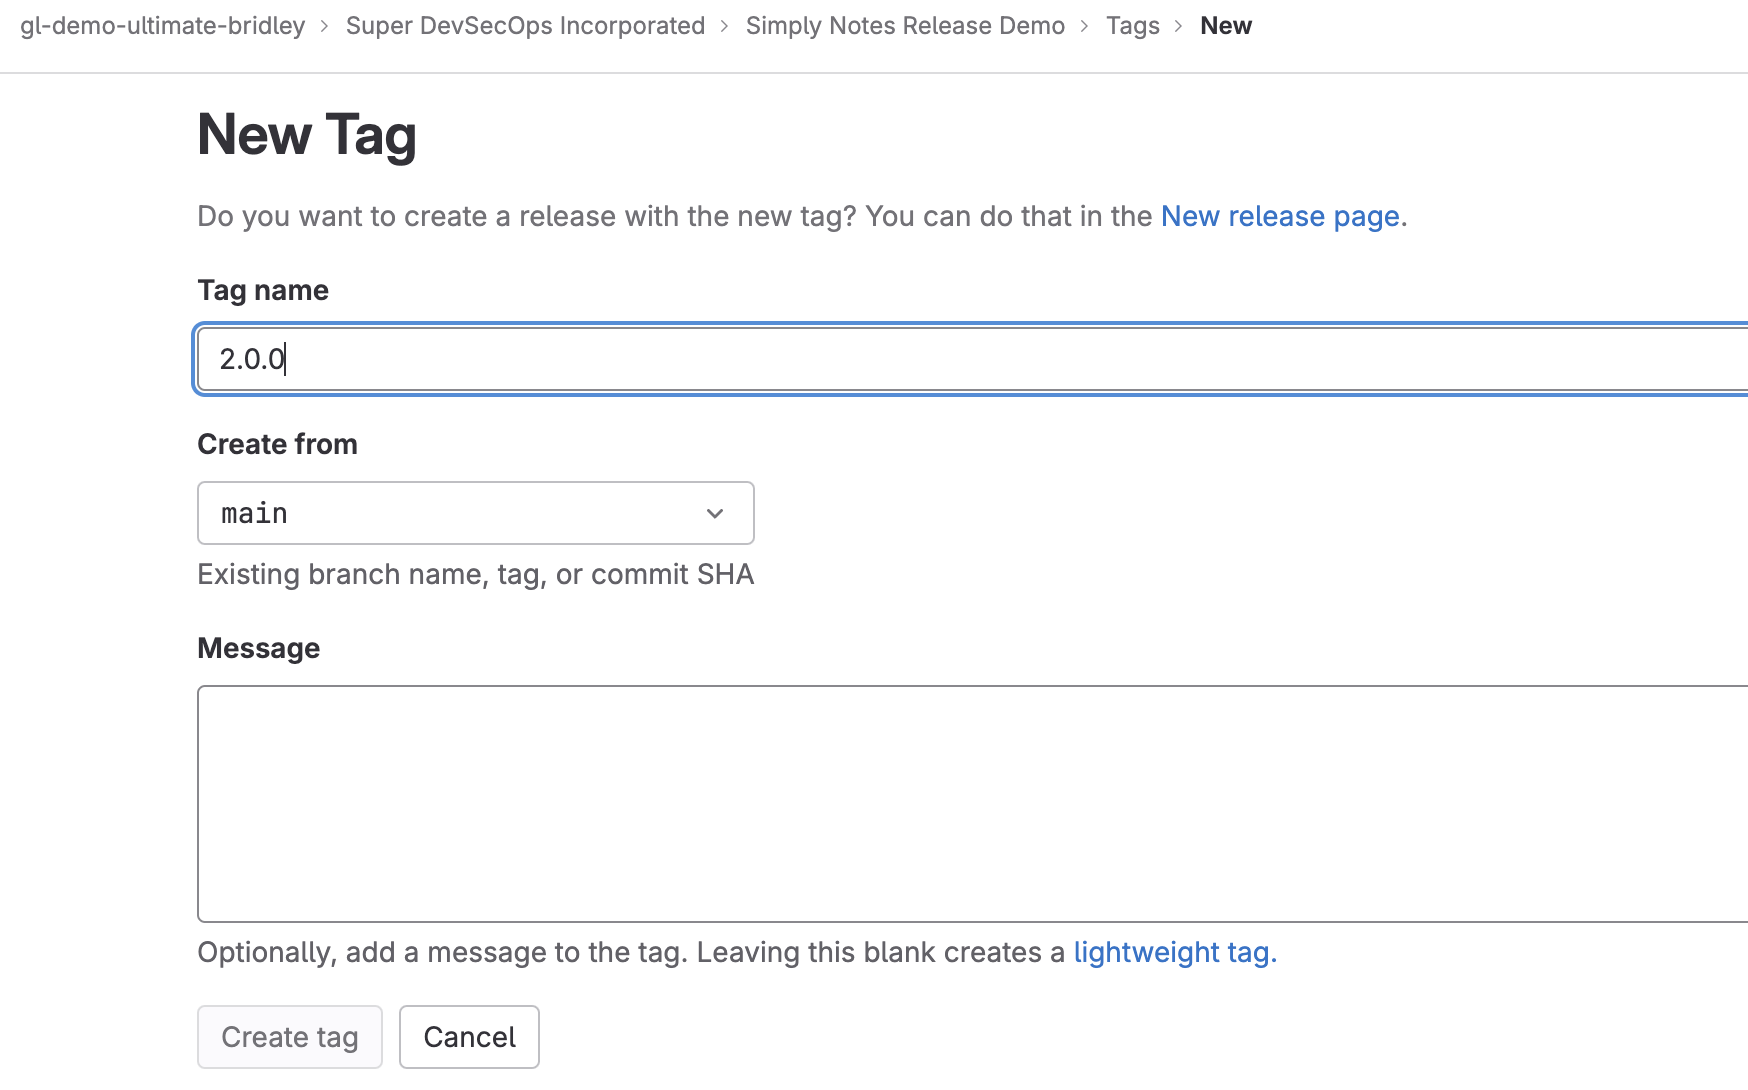 A screenshot of the GitLab UI illustrating how to create a tag